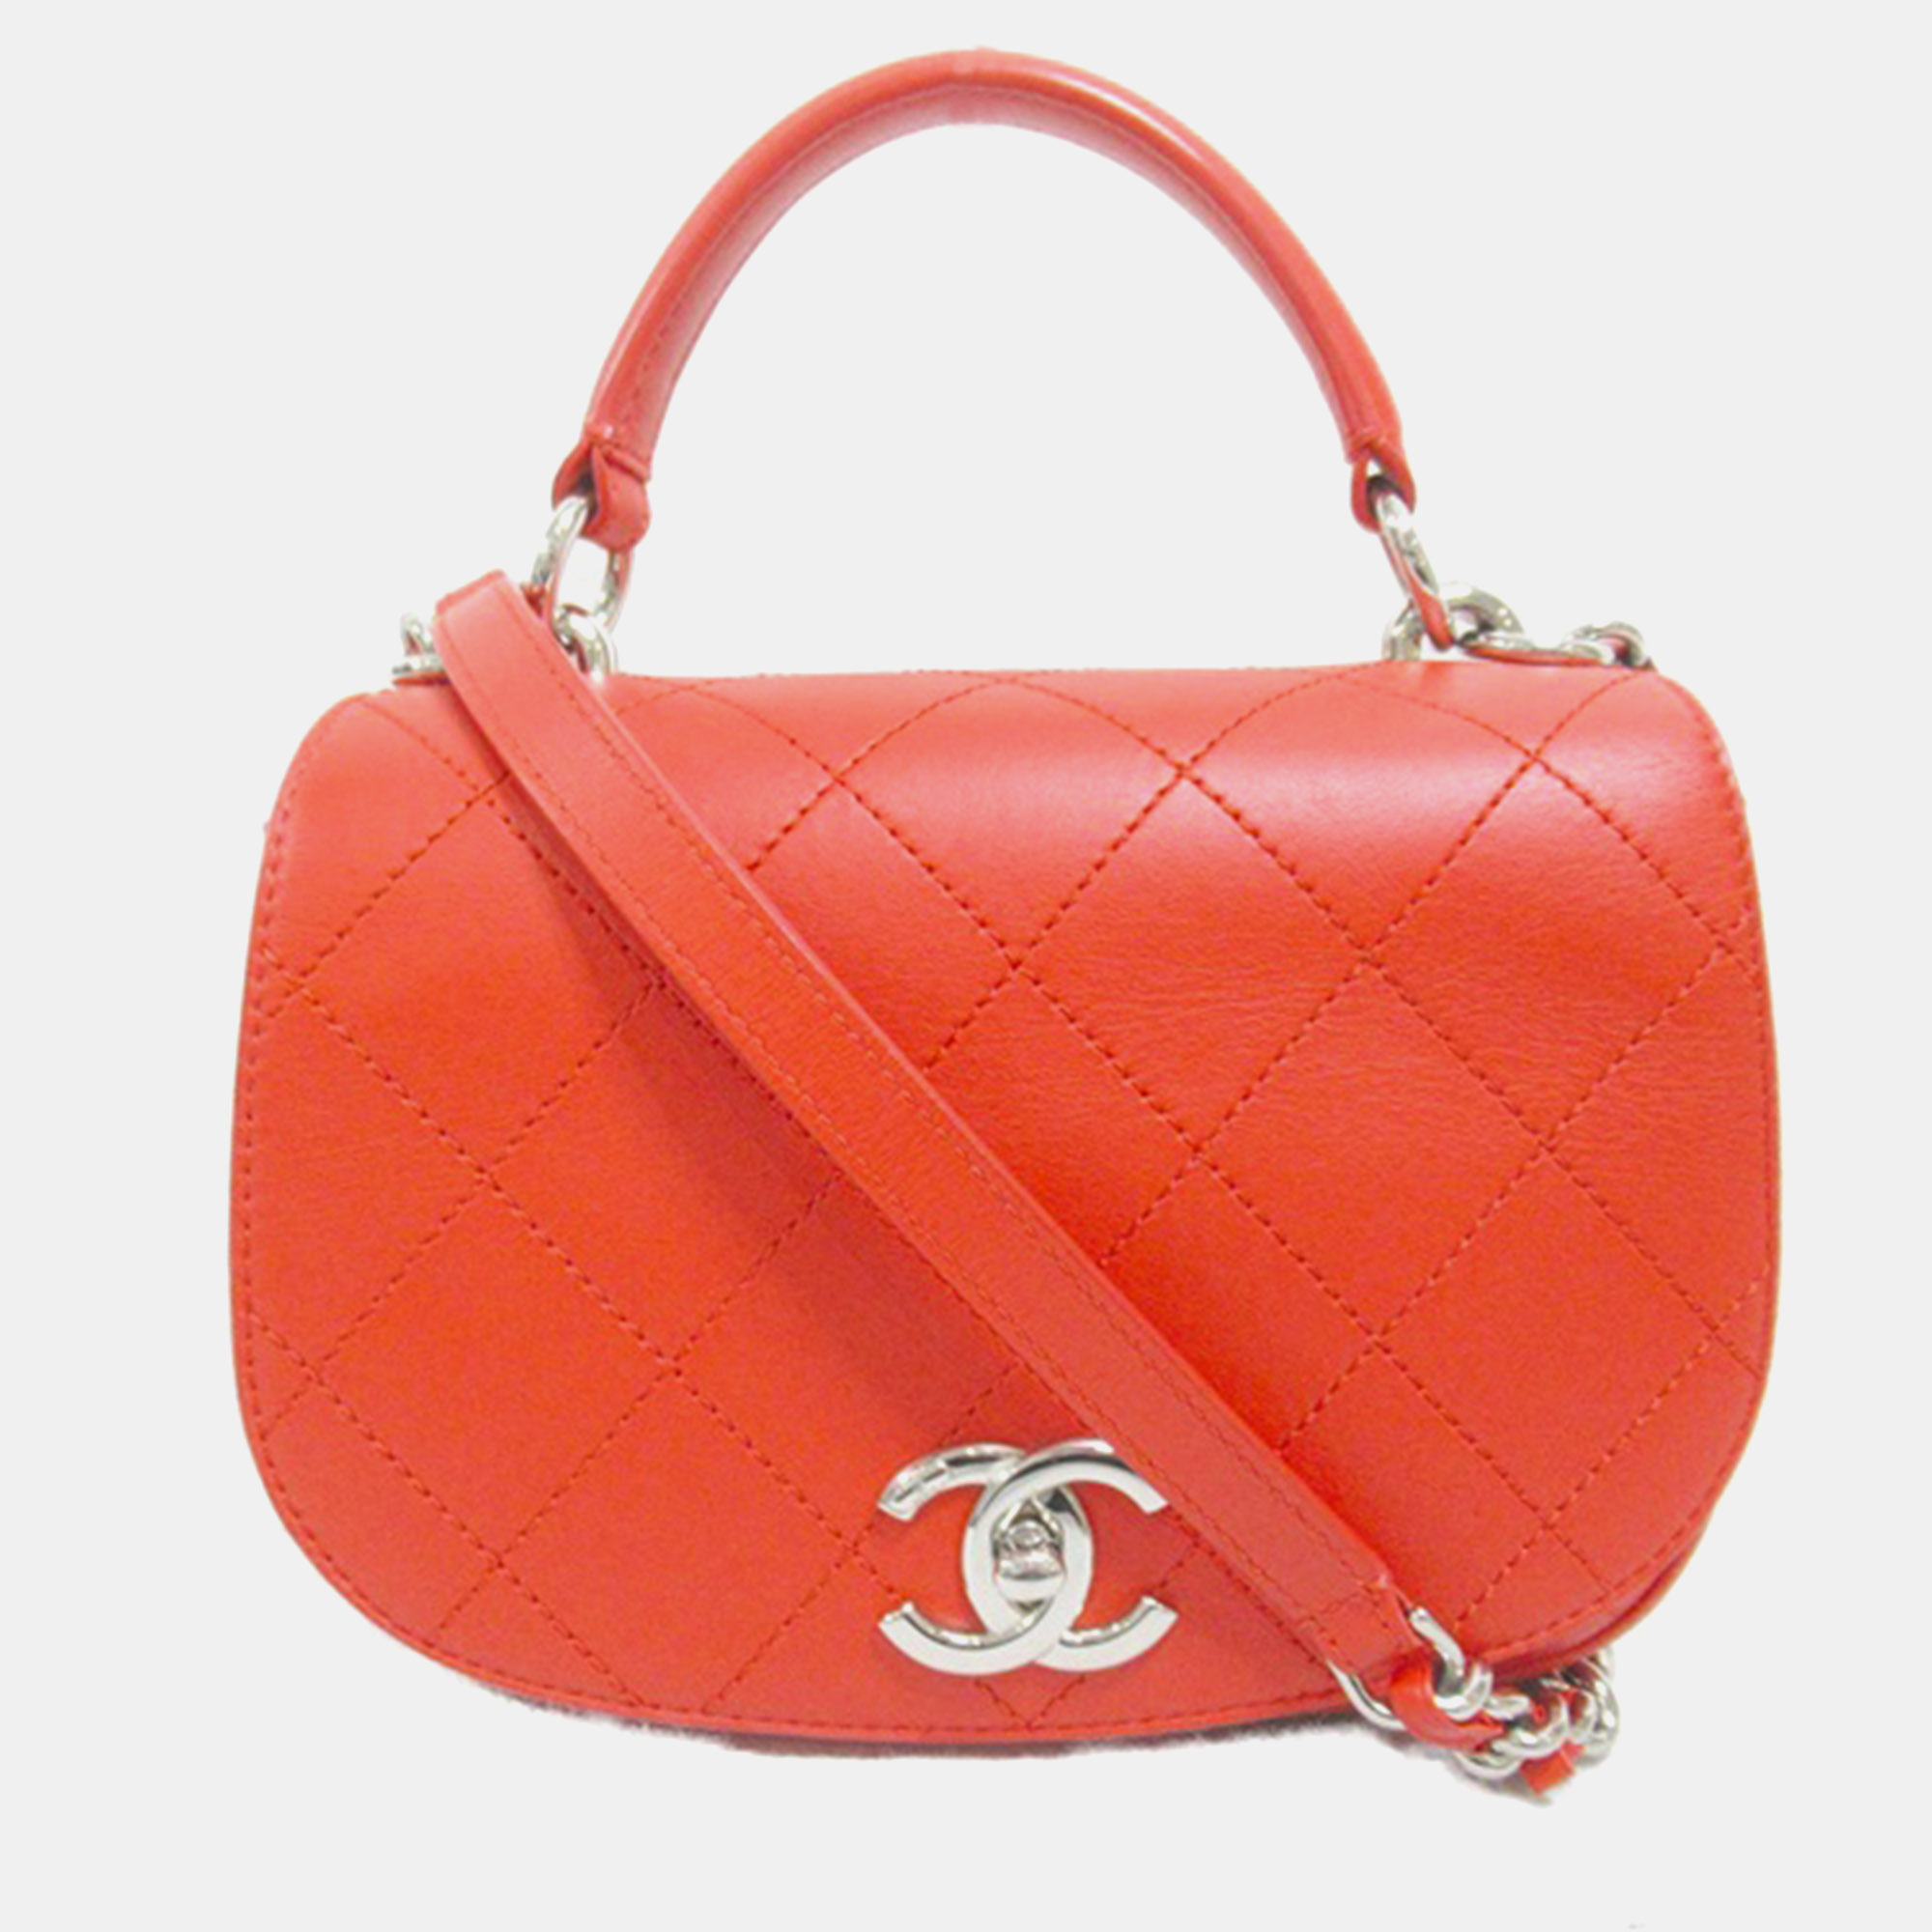 Pre-owned Chanel Red Leather Cc Ring My Bag Flap Bag